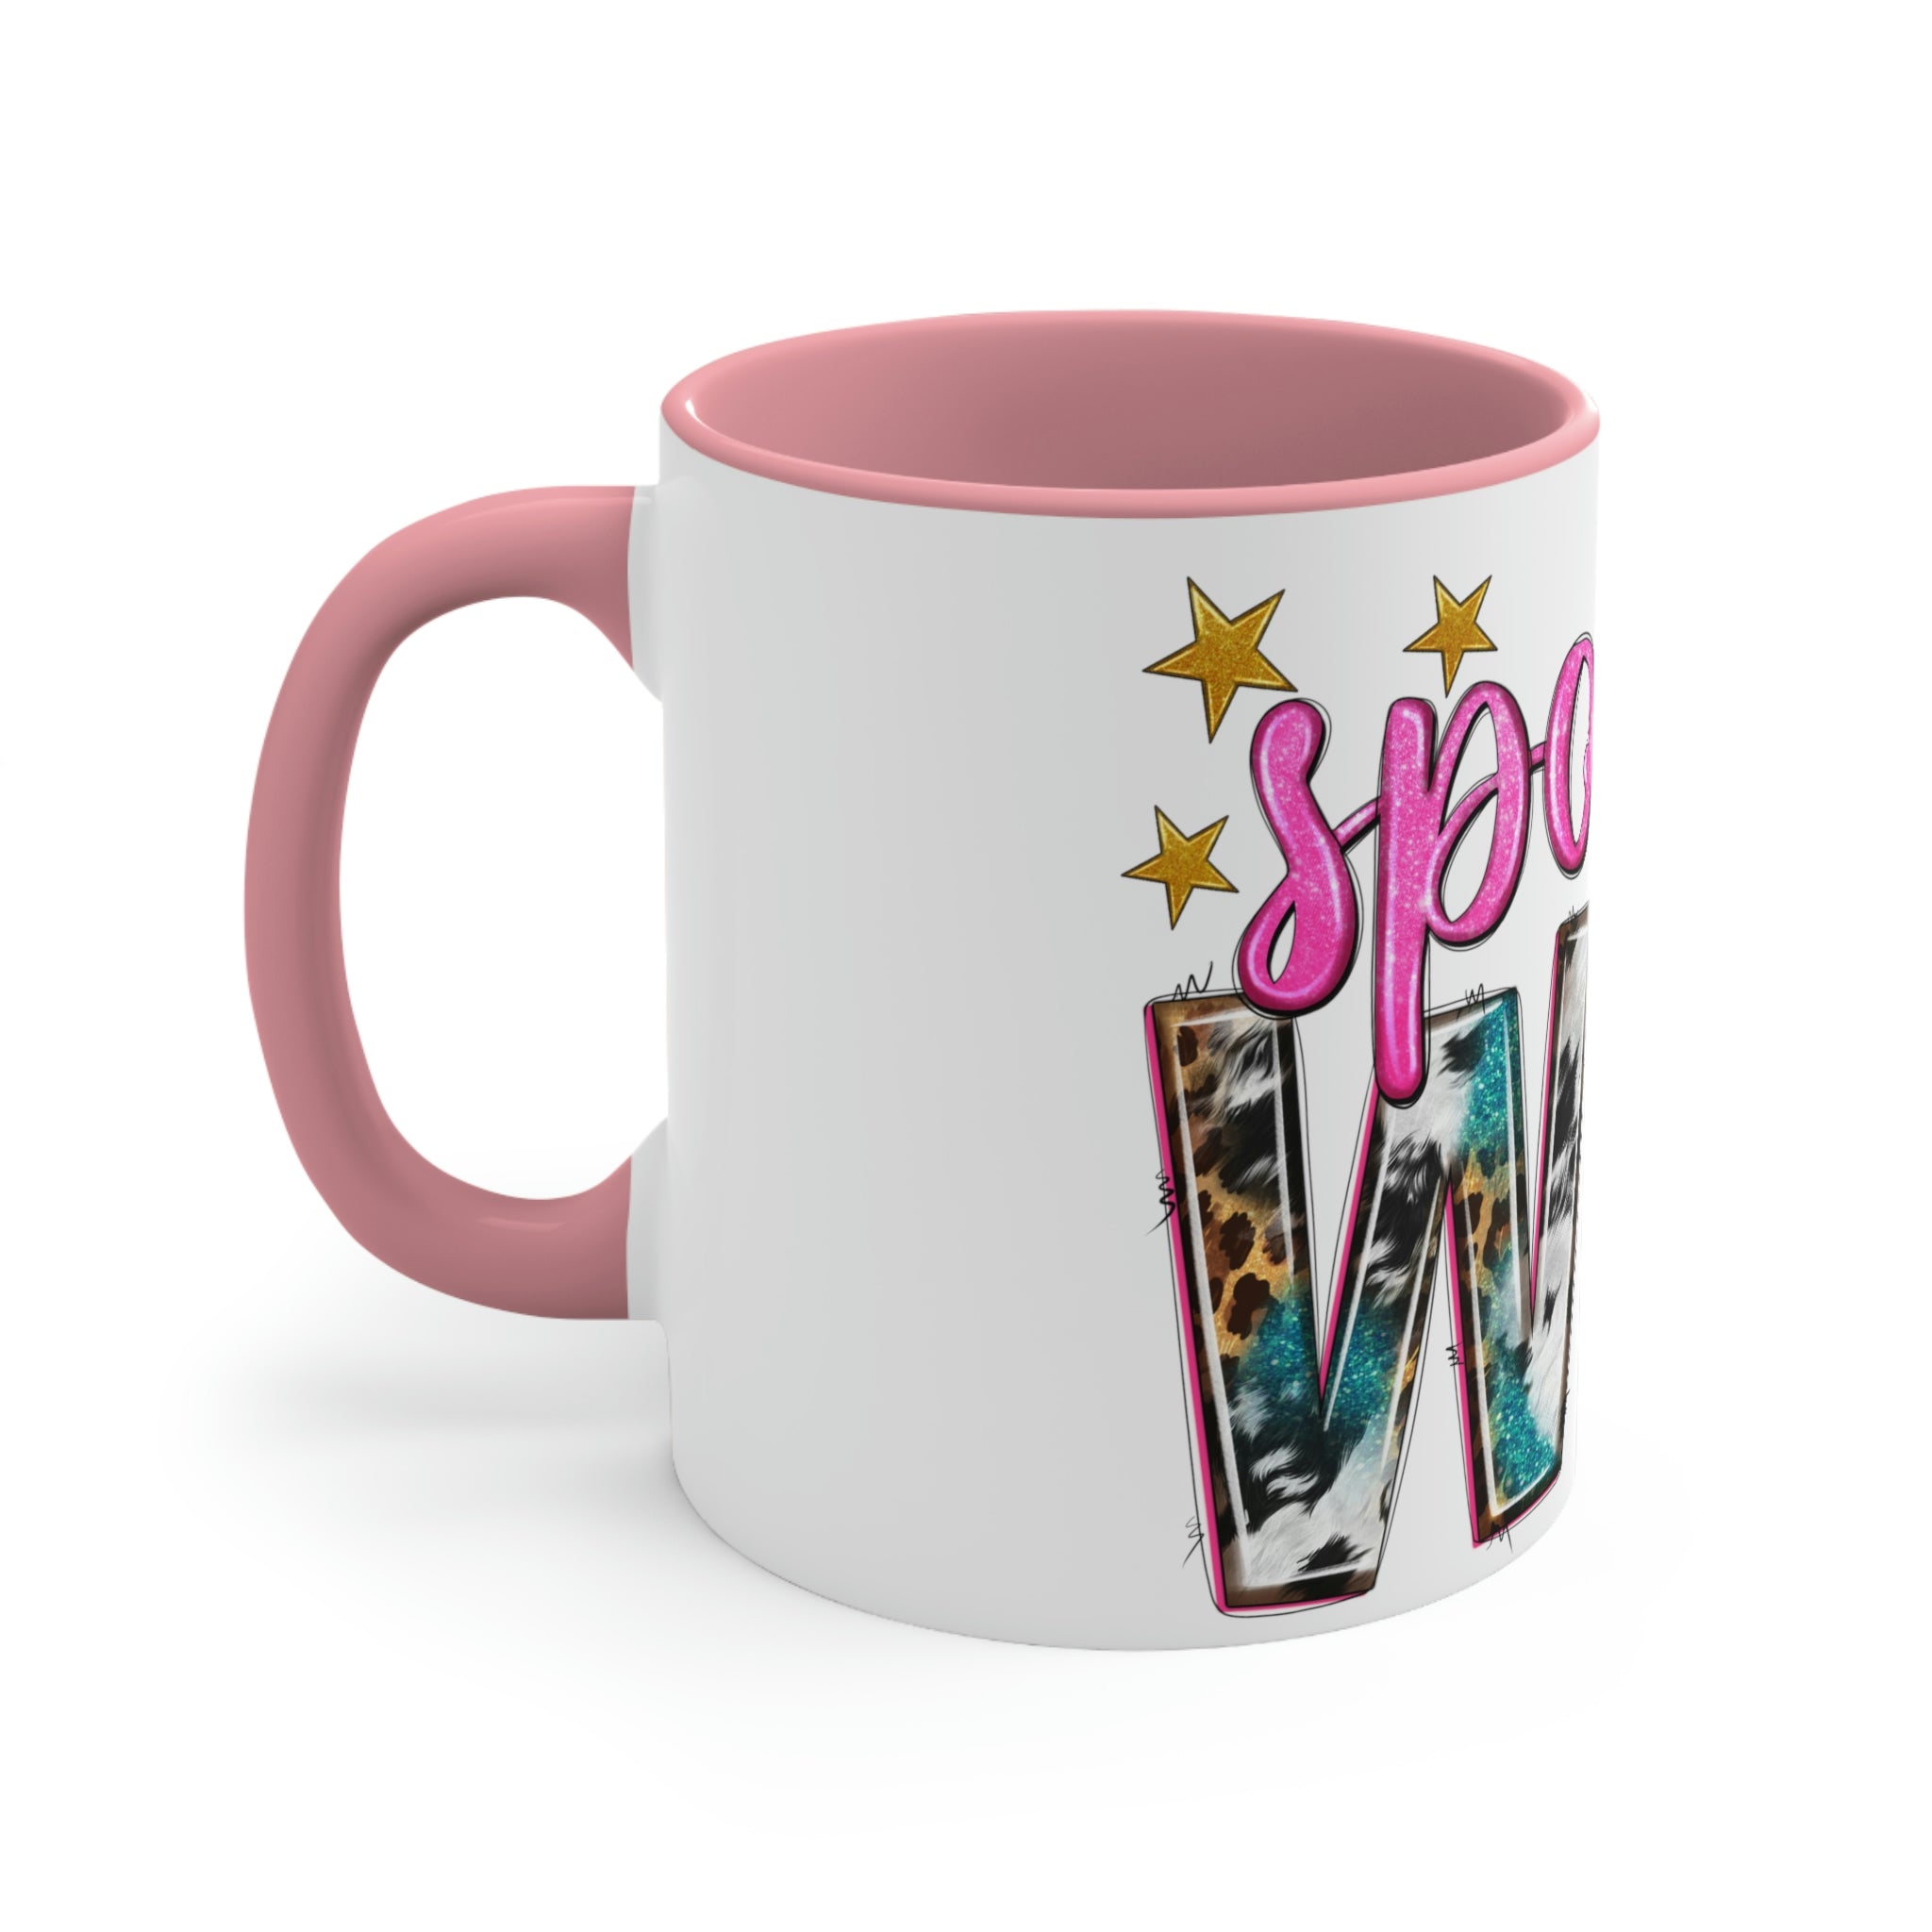 Spoil Your Wife With These Accent Coffee Mug, 11oz